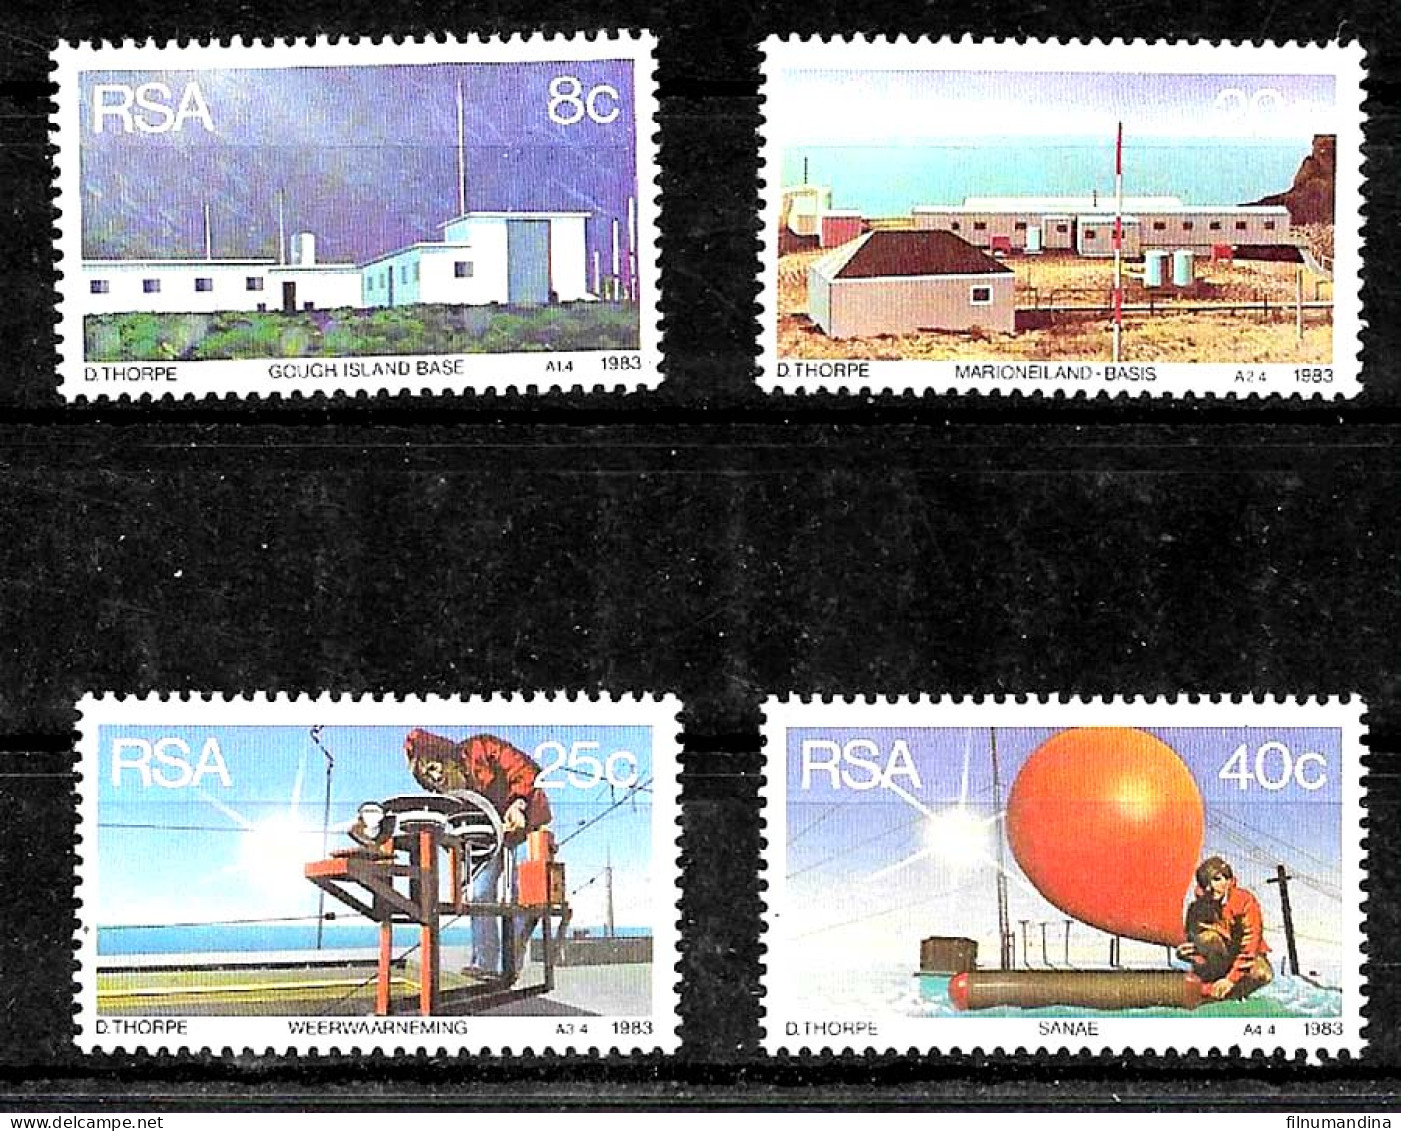 #60001 SOUTH AFRICA 1983  METEOROLOGY RESEARCH STATION  YV 531-4 MNH - Clima & Meteorología